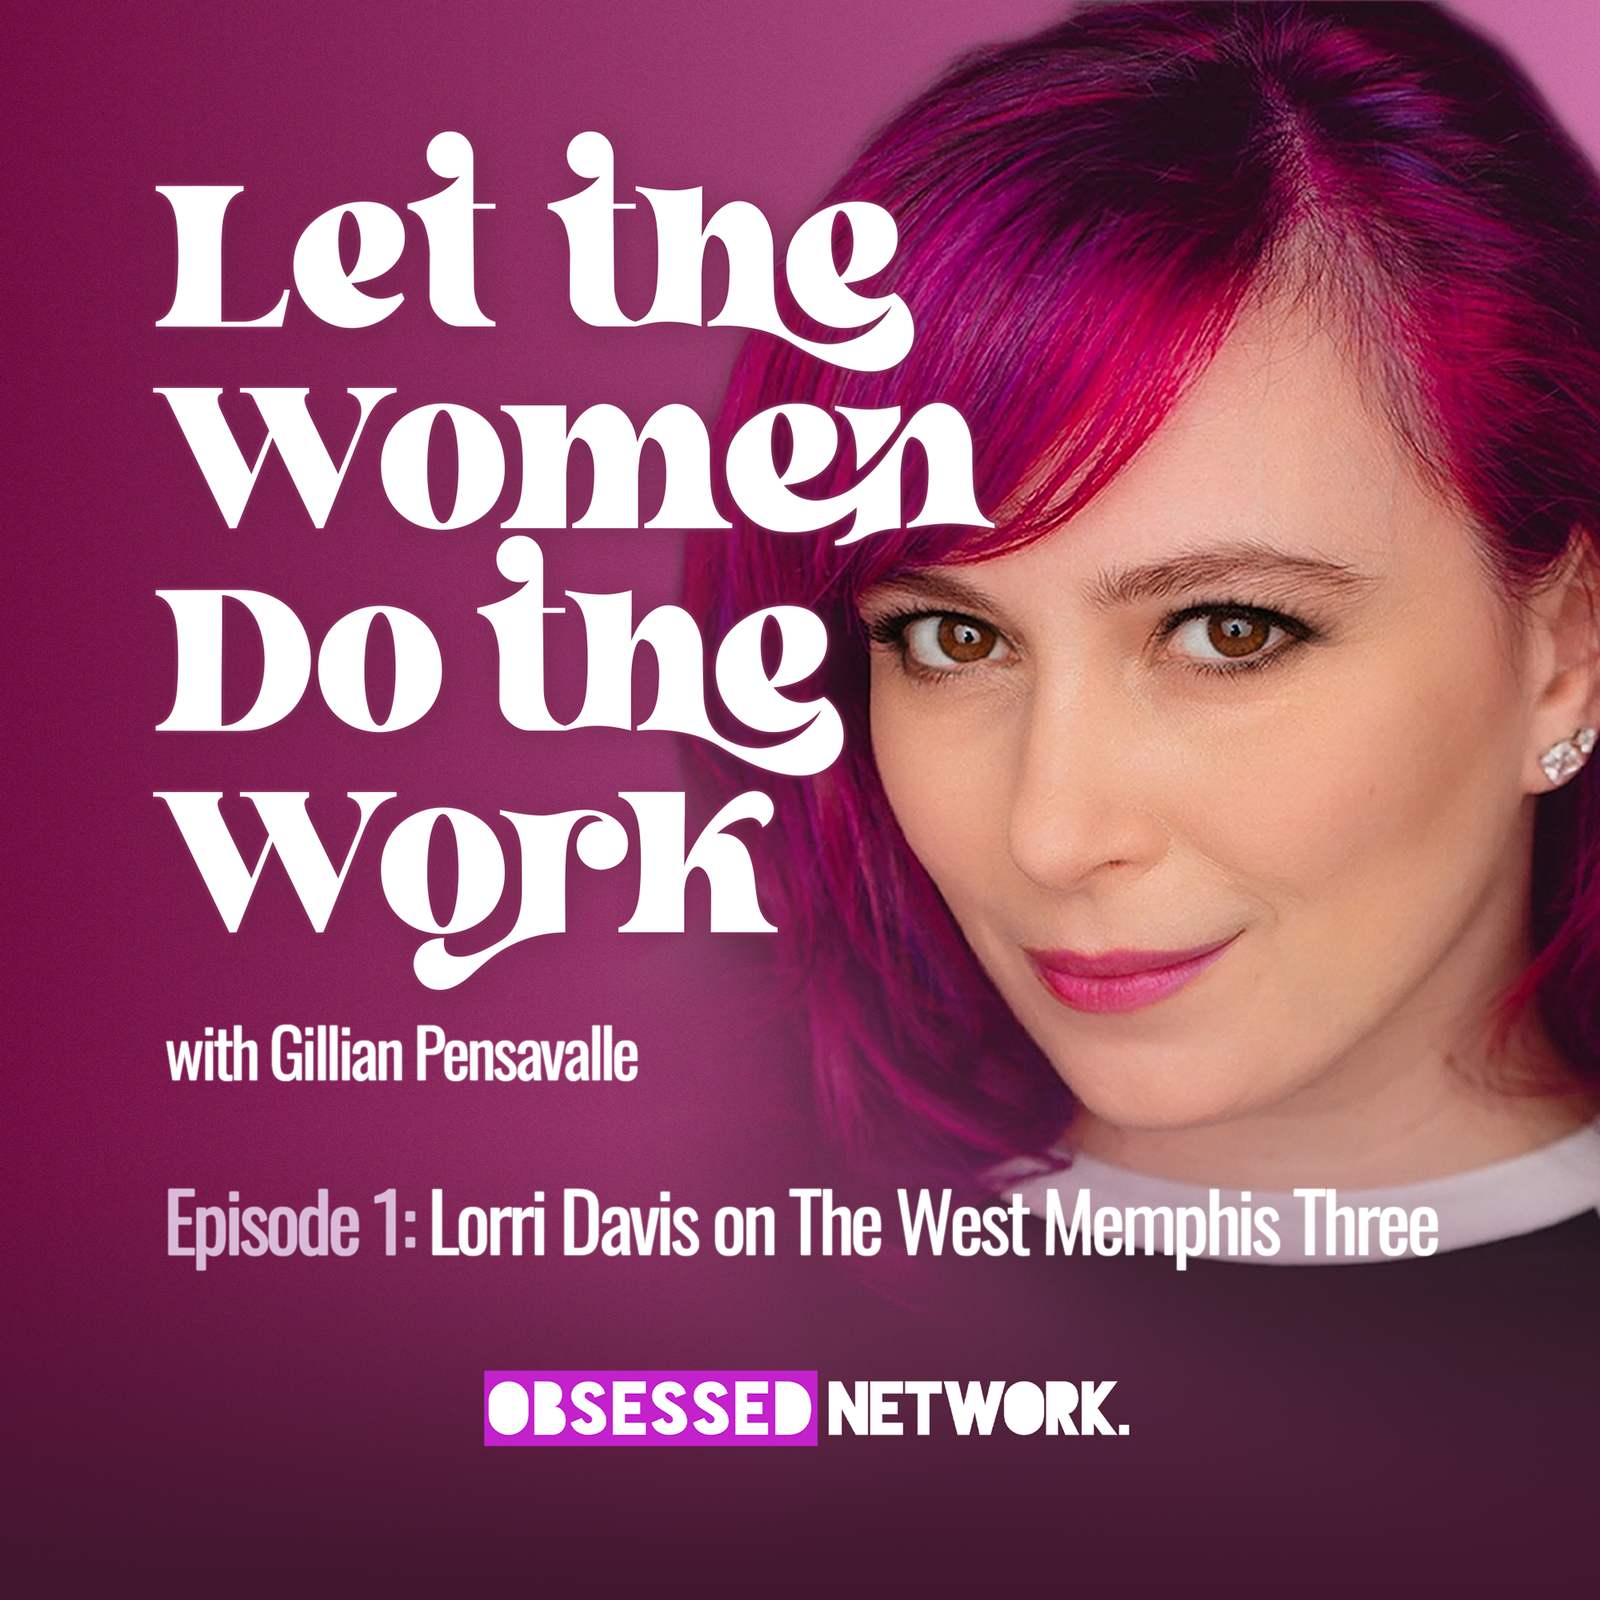 Let The Women: Lorri Davis on The West Memphis Three by Obsessed Network